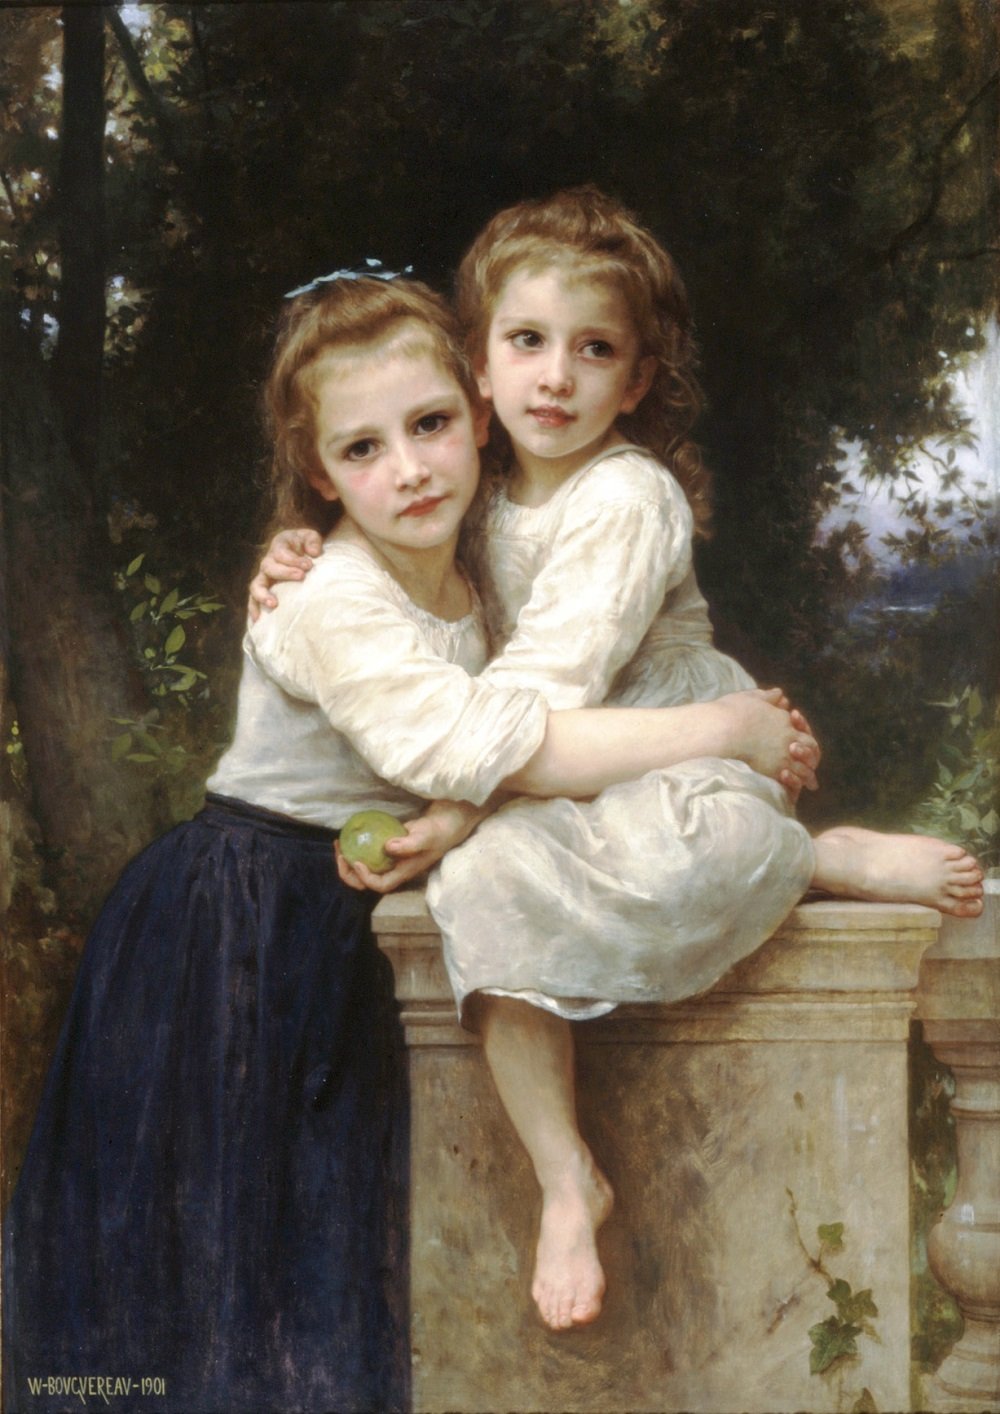 William-Adolphe_Bouguereau_(1825-1905)_-_Two_Sisters_(1901)-1000pix.jpg